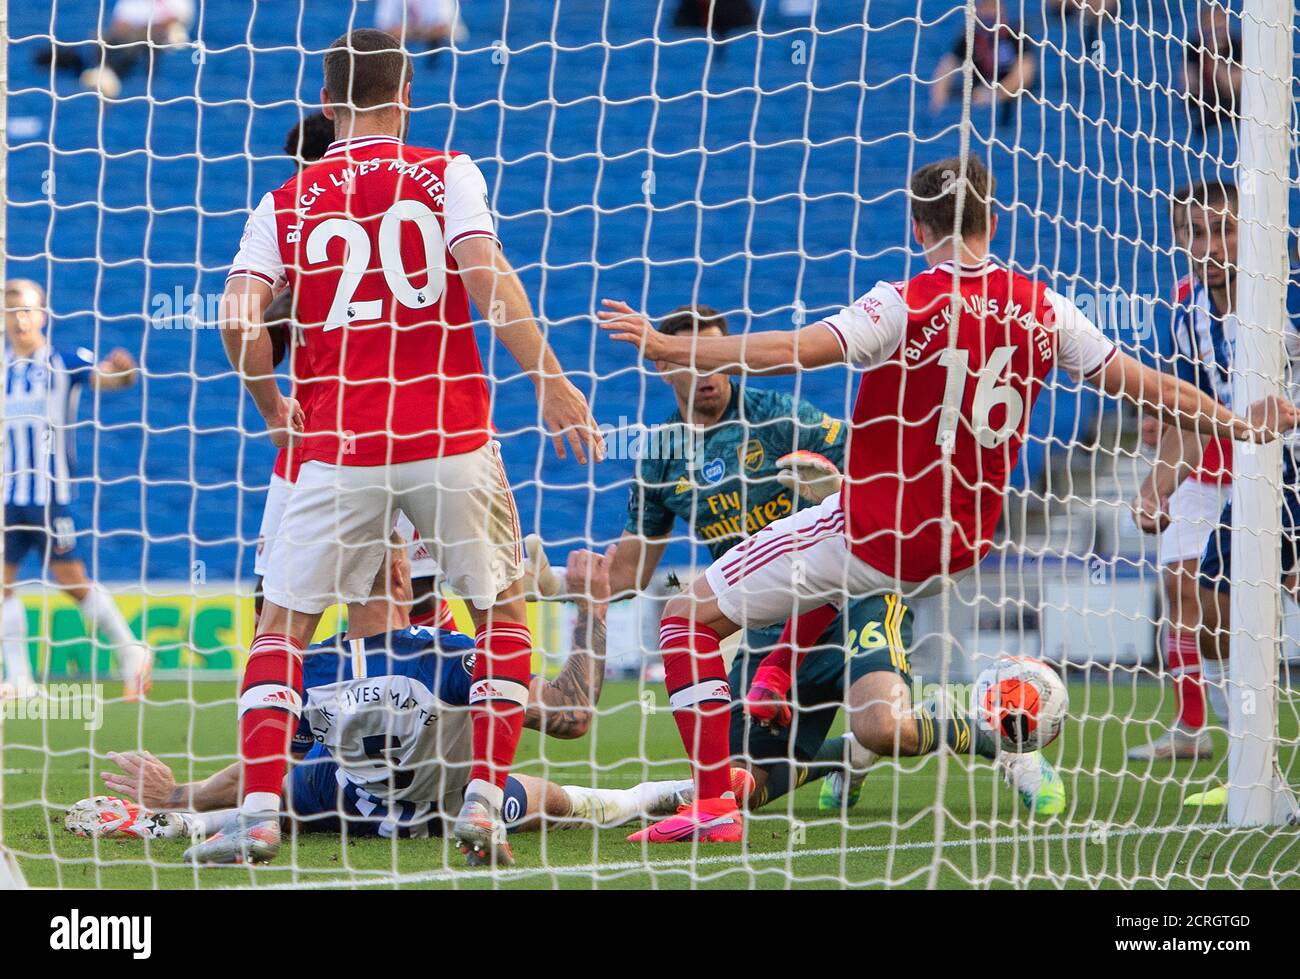 Lewis Dunk (number 5) equalises for Brighton during the Premier League match at the AMEX Stadium, Brighton.  PHOTO CREDIT : © MARK PAIN / ALAMY STOCK Stock Photo